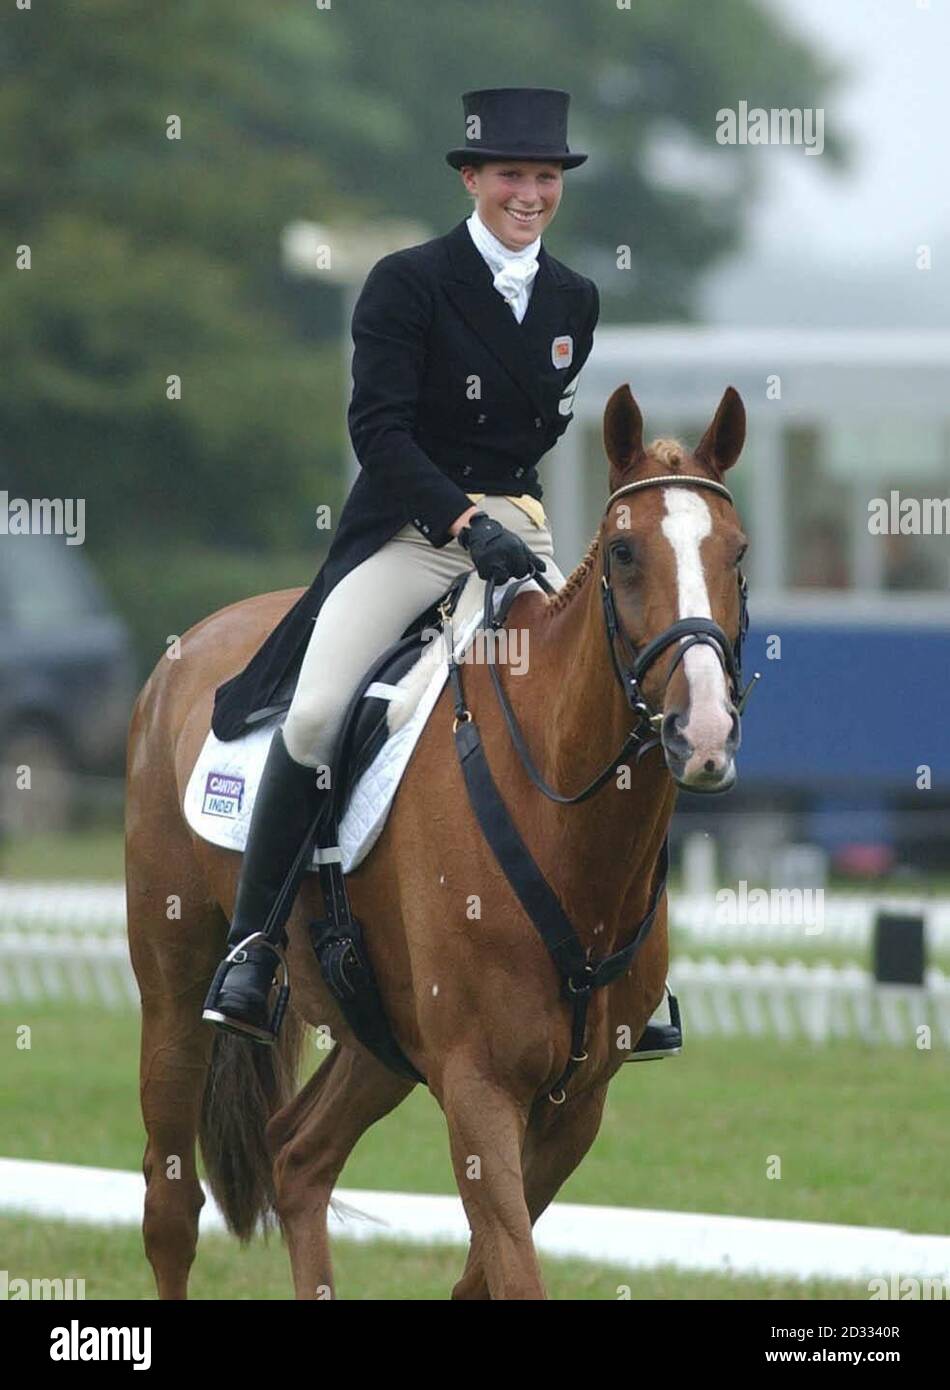 Zara Phillips on horse Toytown after competing in the Advanced Dressage in  the Doubleprint Festival of British Eventing at her mother the Princess  Royal's home Gatcombe Park, near Minchinhampton, Gloucestershire. The three